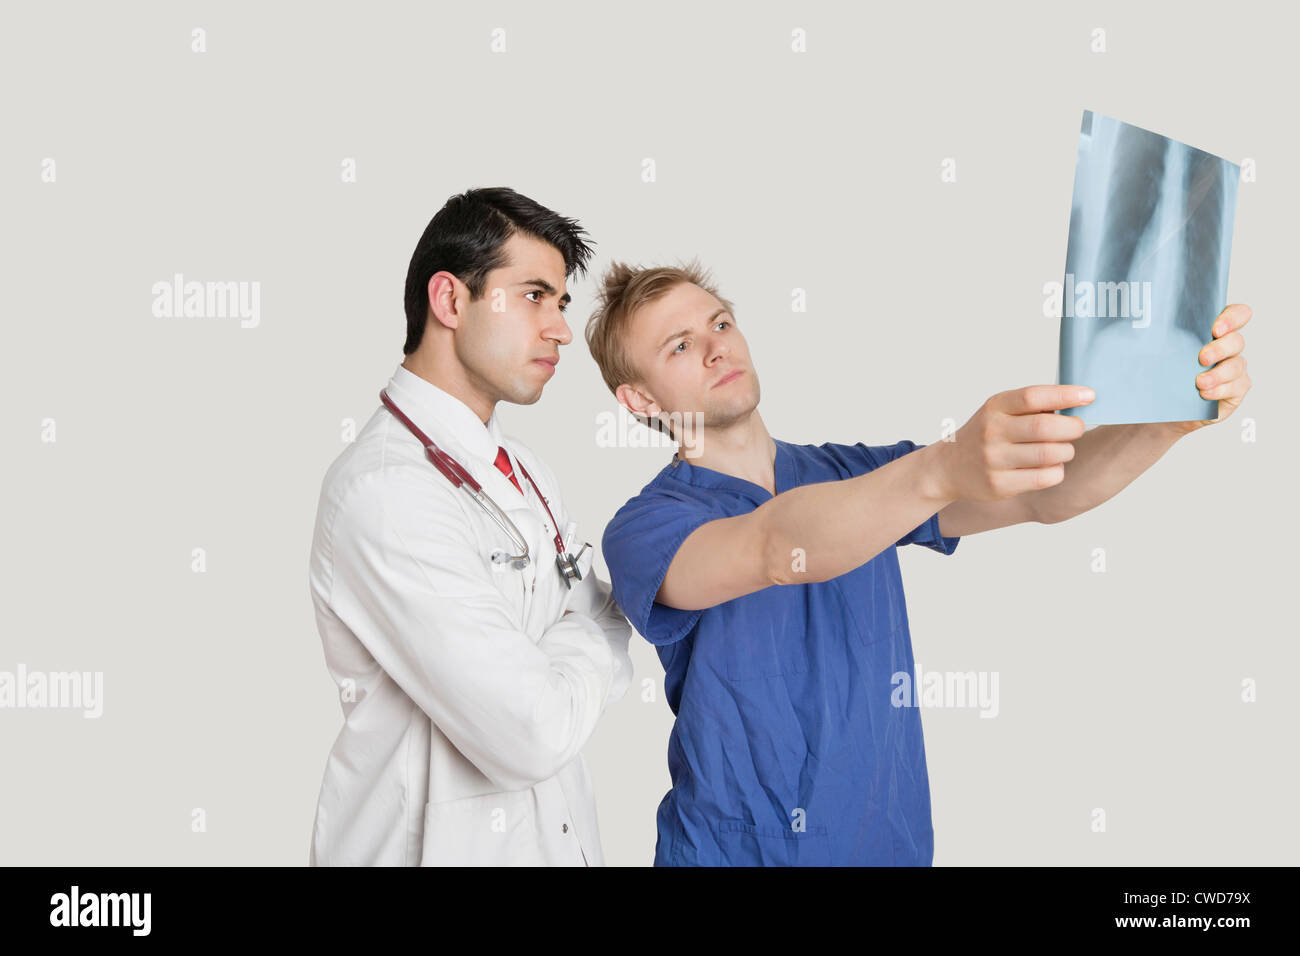 Medical professionals looking at chest x-ray over light gray background Stock Photo